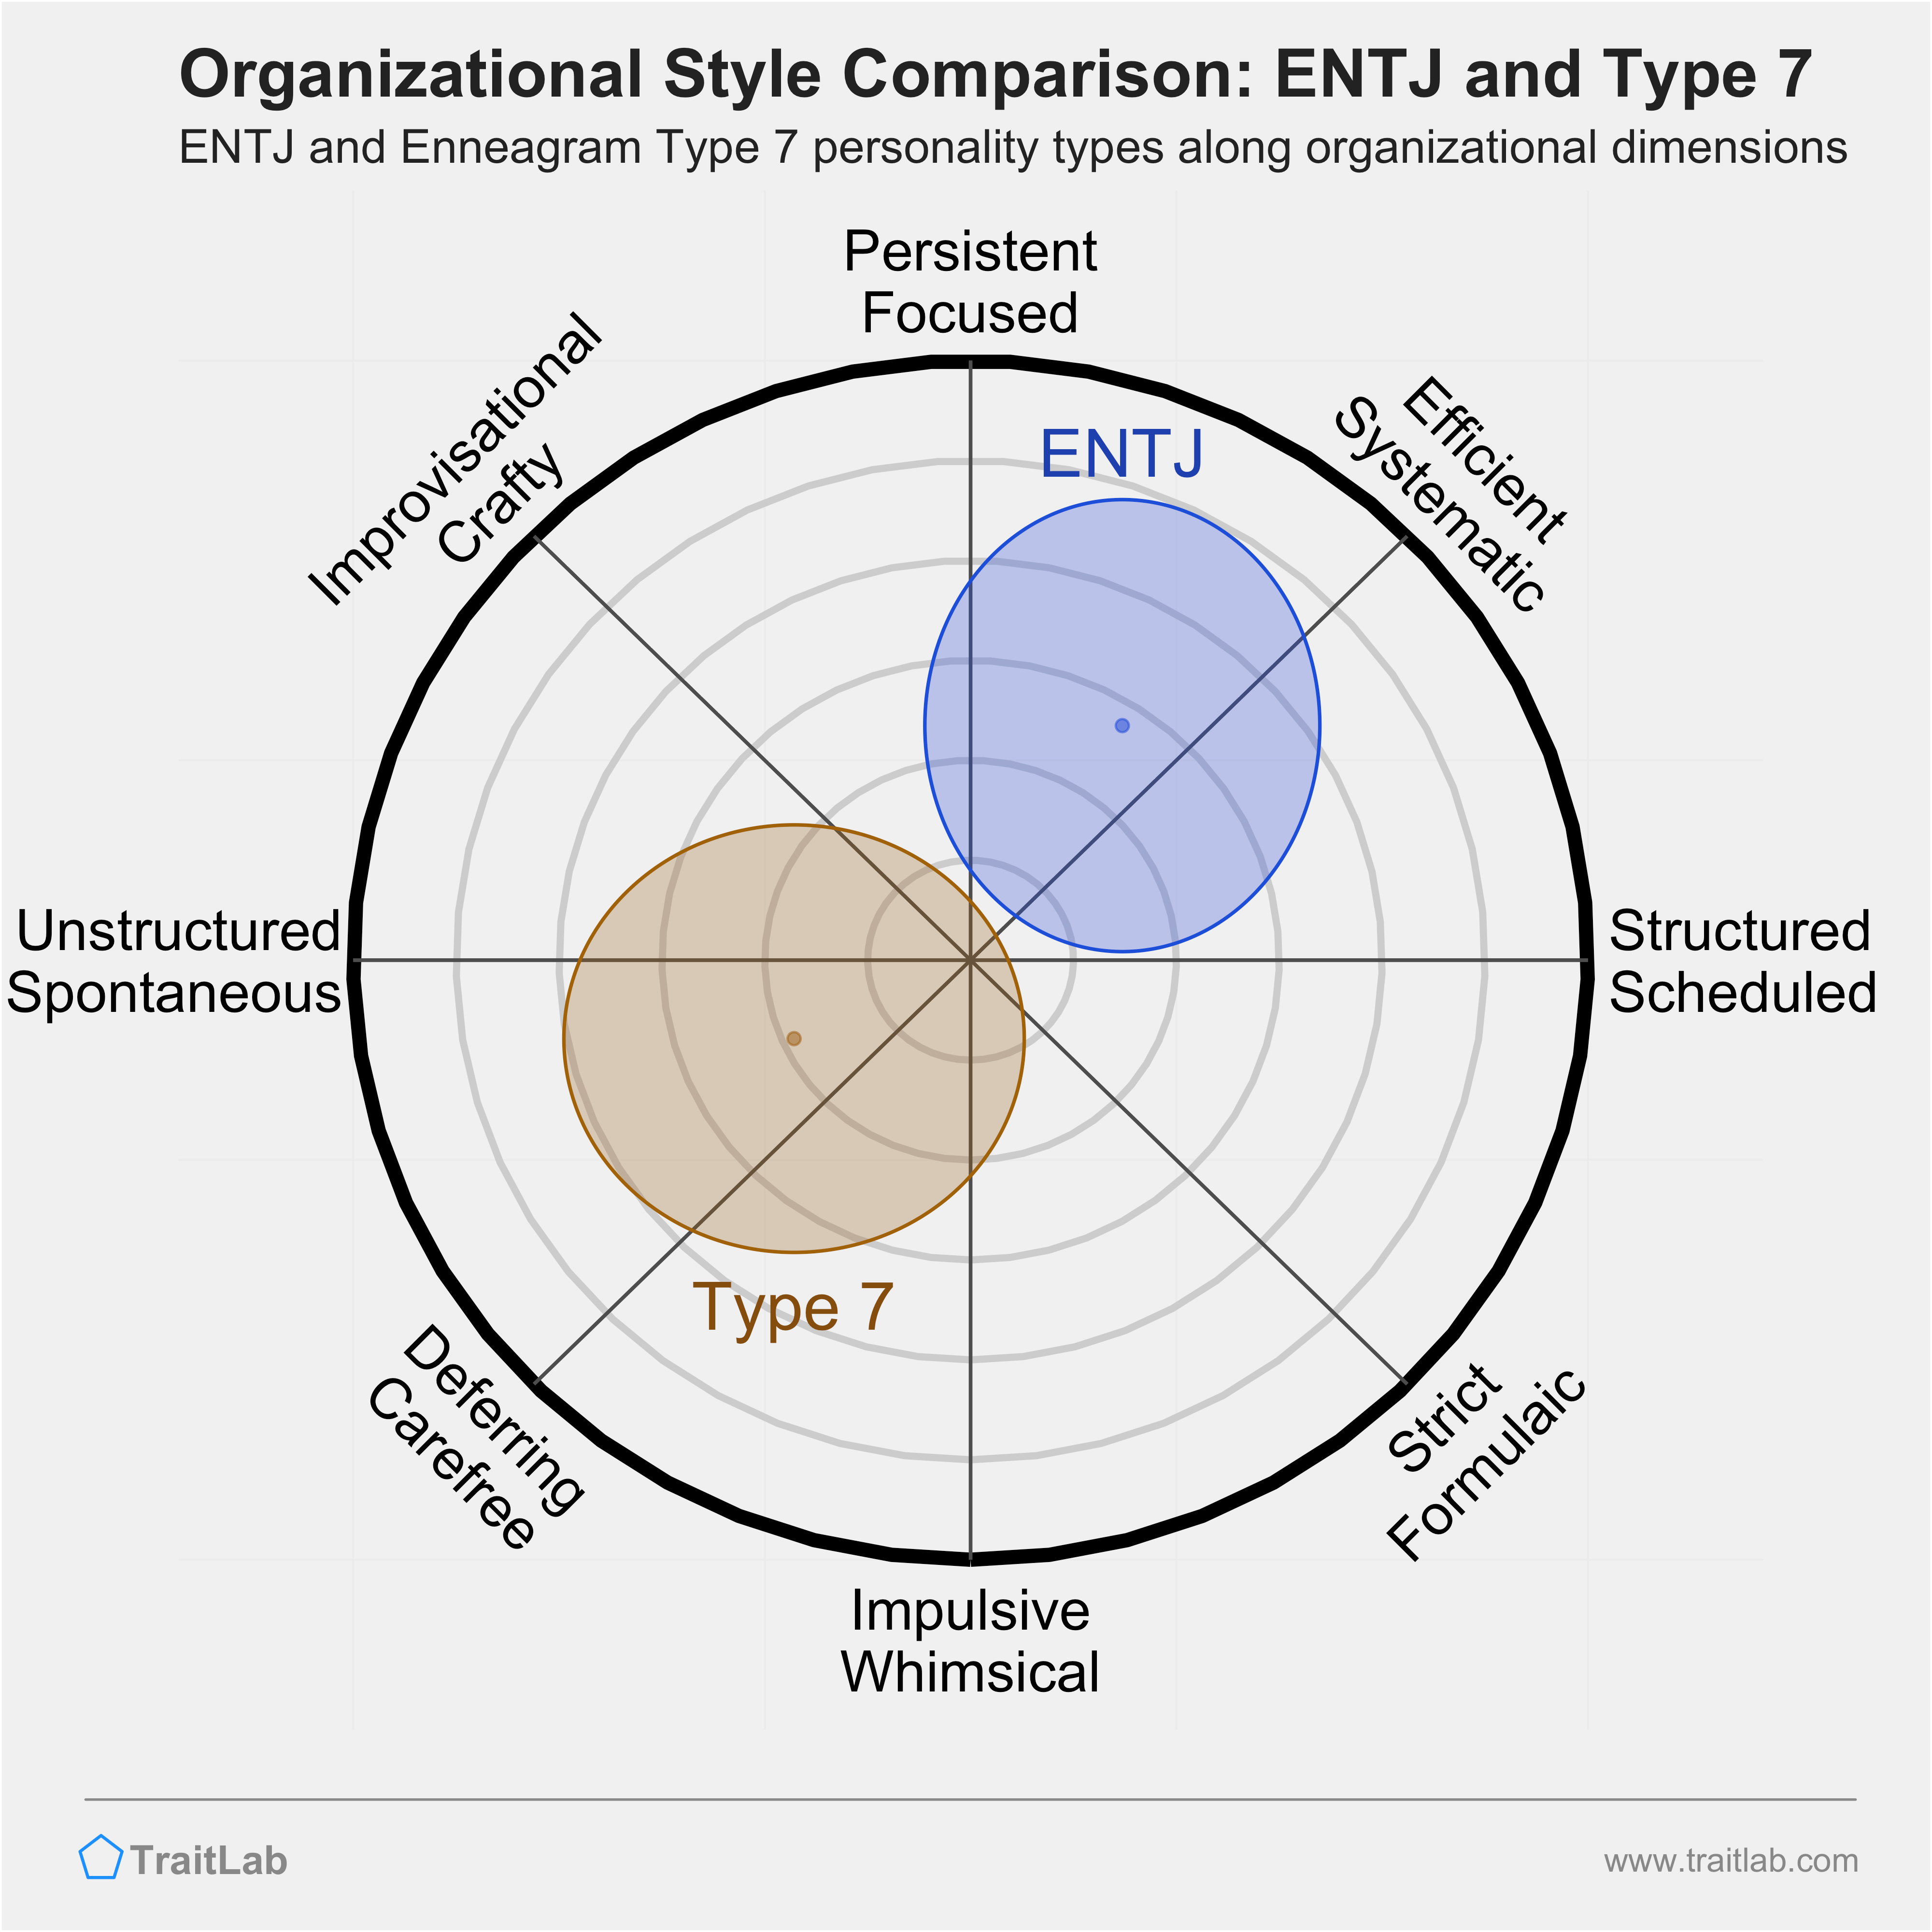 ENTJ and Type 7 comparison across organizational dimensions